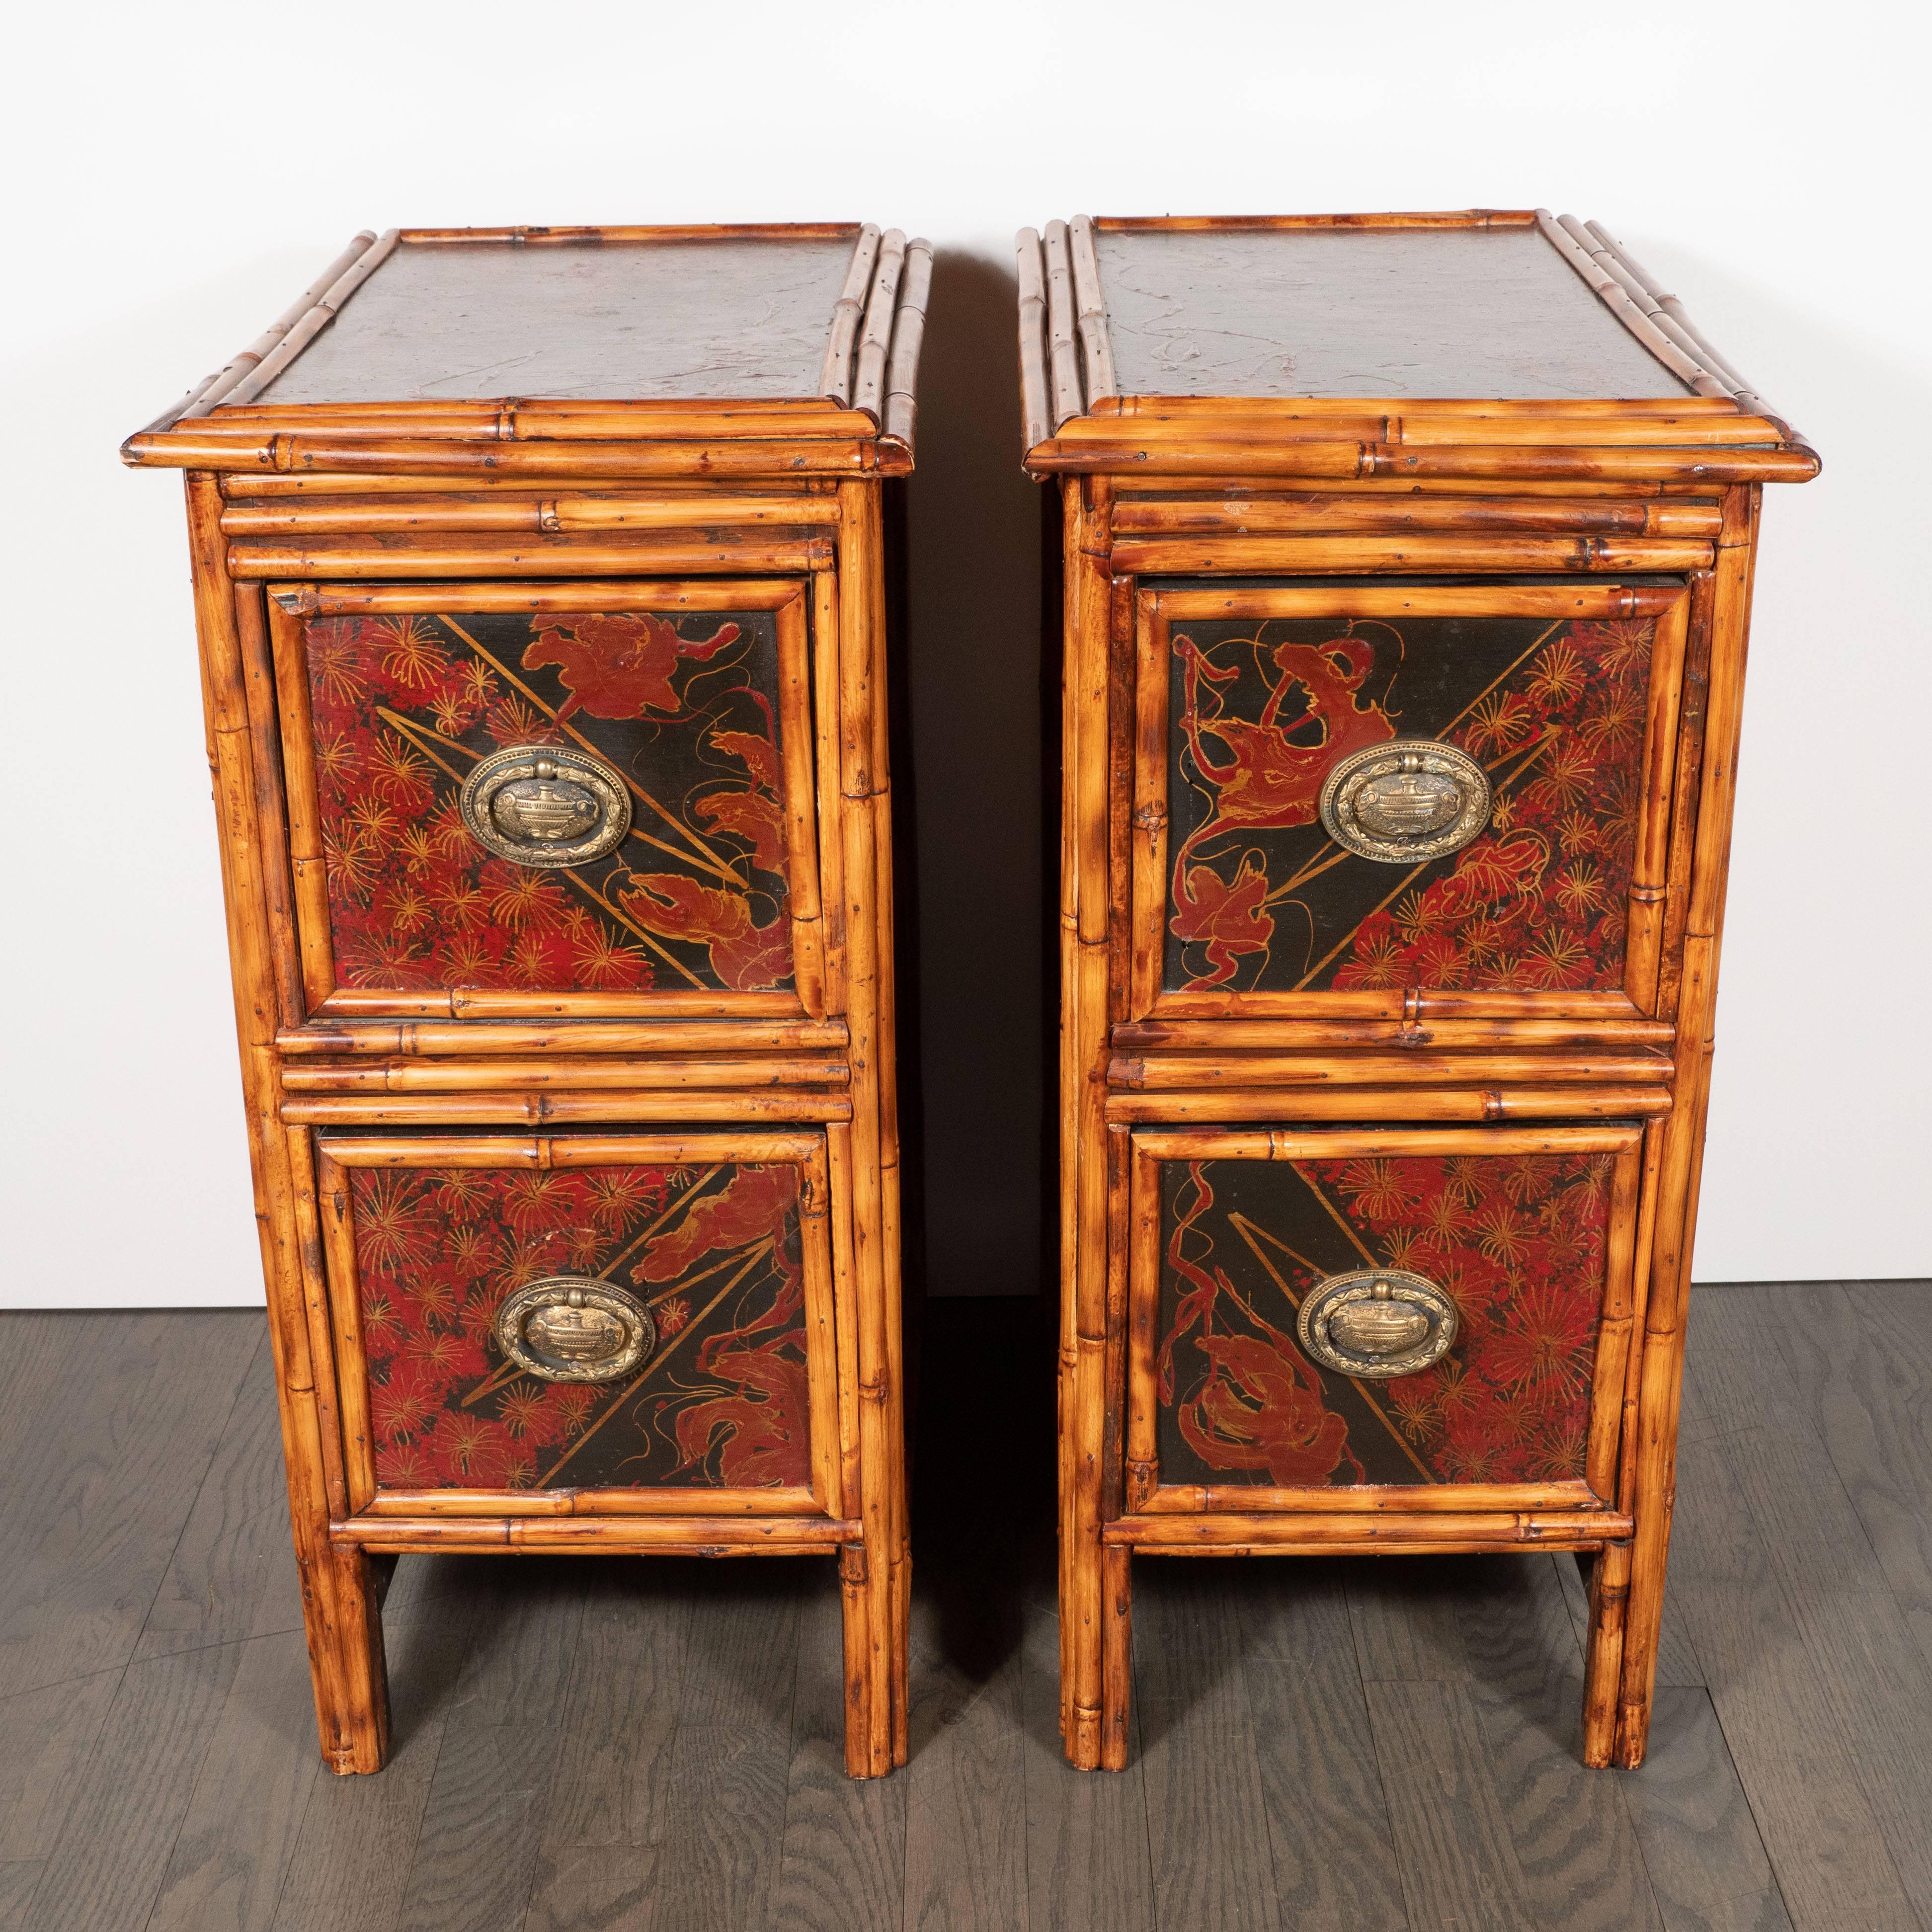 This sophisticated pair of nightstands were realized in the United States, circa 1925. They are a stunning first-rate example of the influence of the East on the design aesthetic of the west. The nightstands feature rectangular bodies with caned